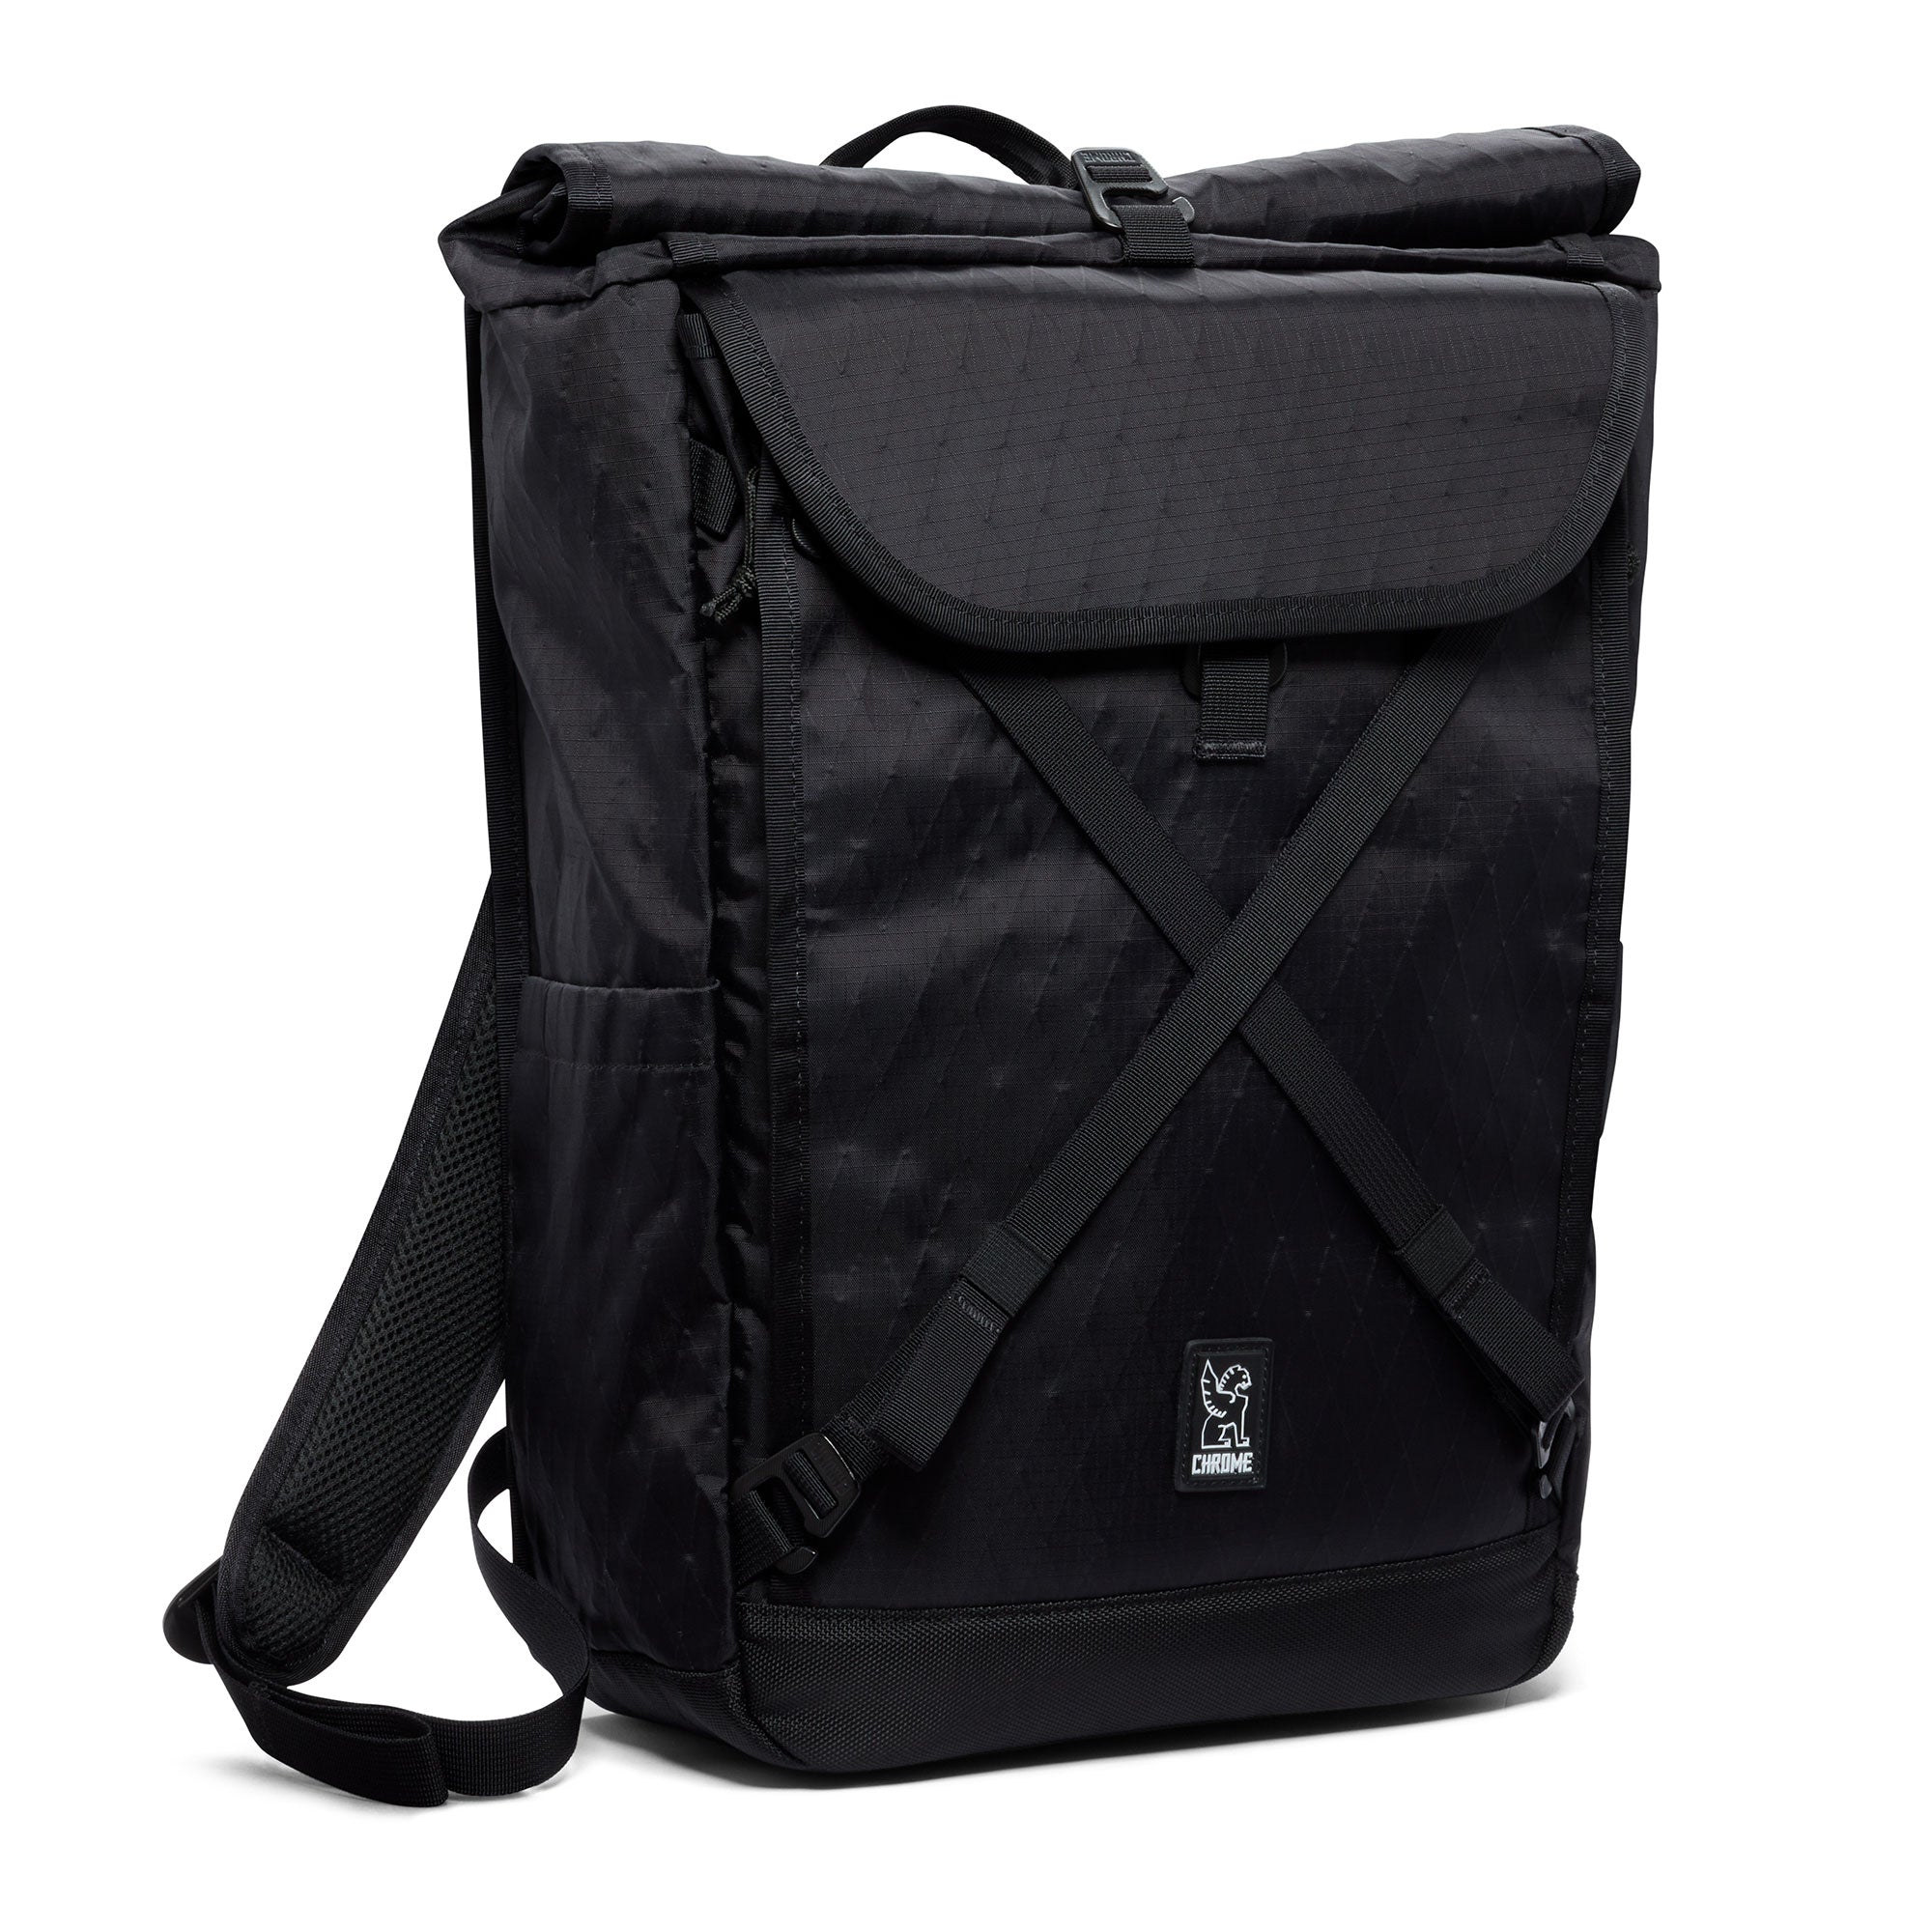 Bravo 4.0 backpack in black x fabric #color_black x